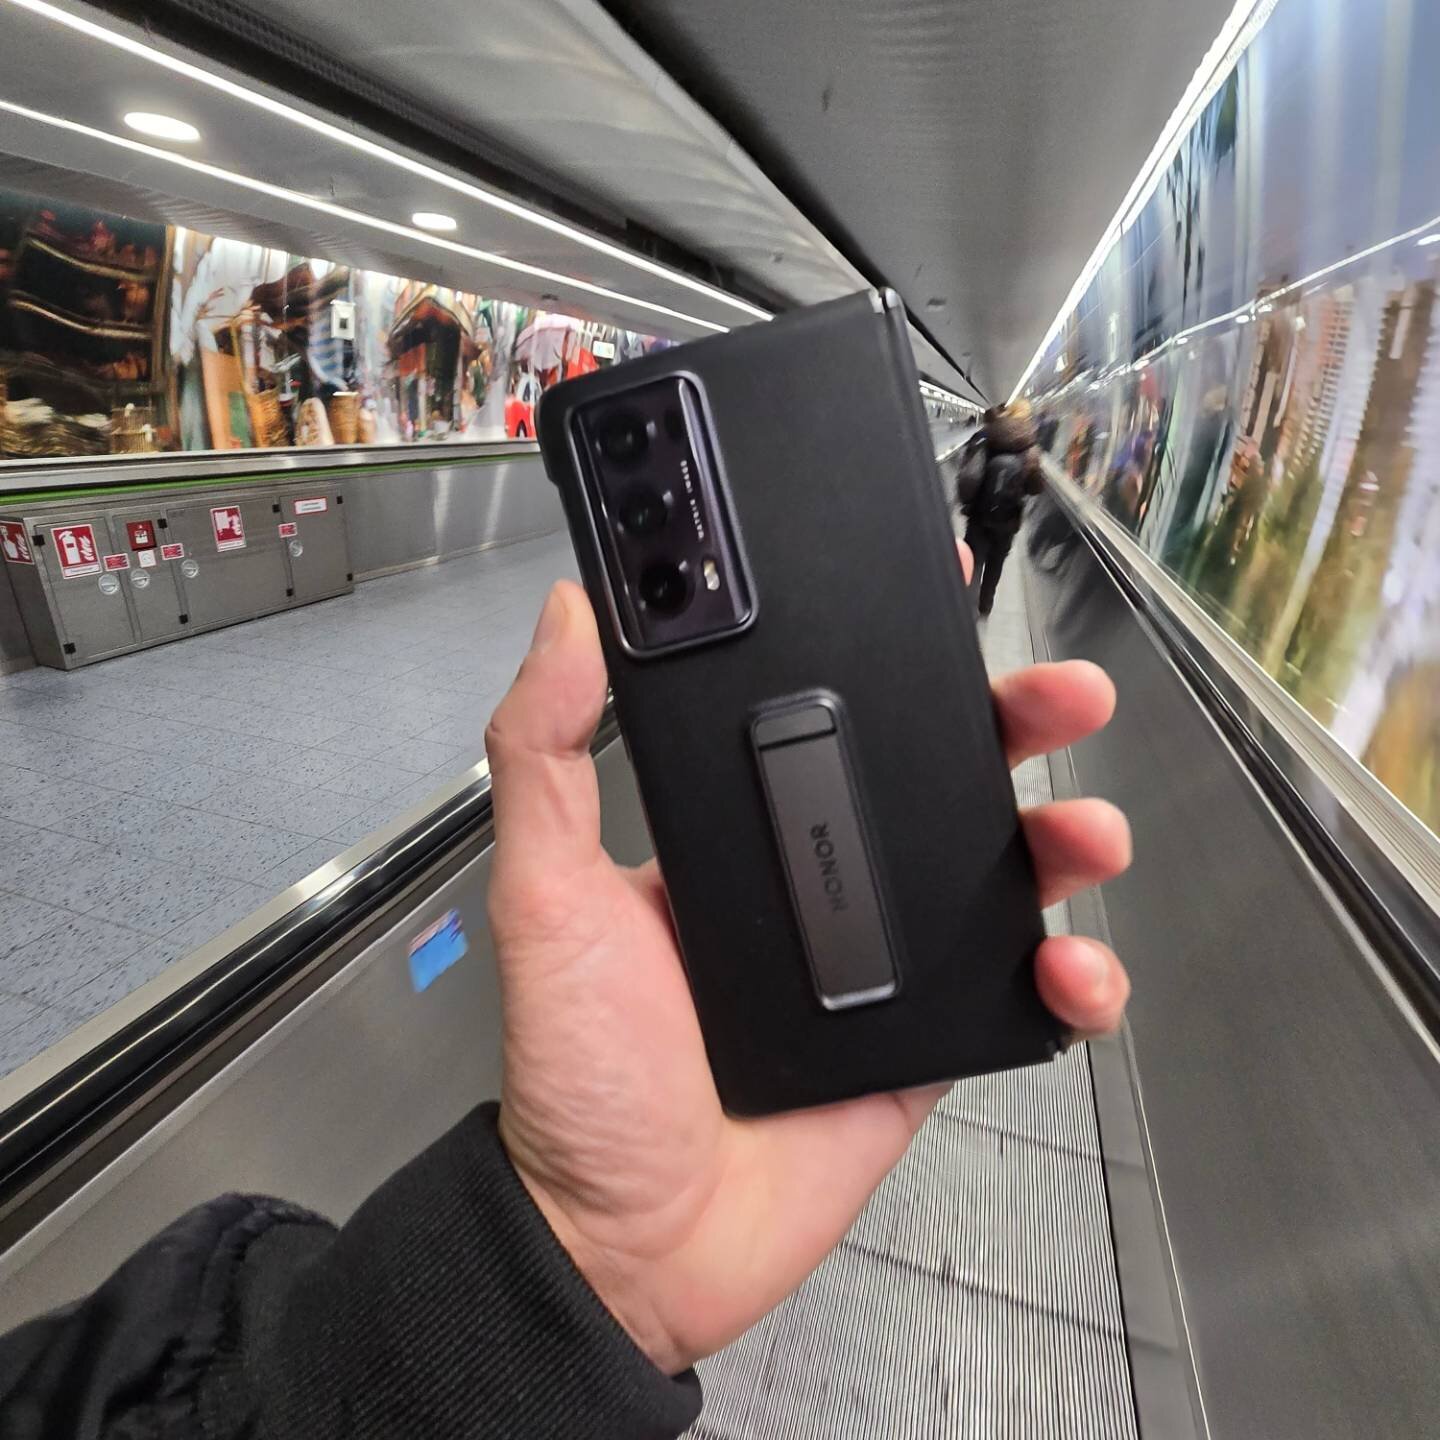 The #HonorMagicV2 is the world's thinnest and lightest folding phone! It's also maybe the best travel companion for anyone who likes watching movies on a plane! ✈️📱🎥 #travel #technology #innovation